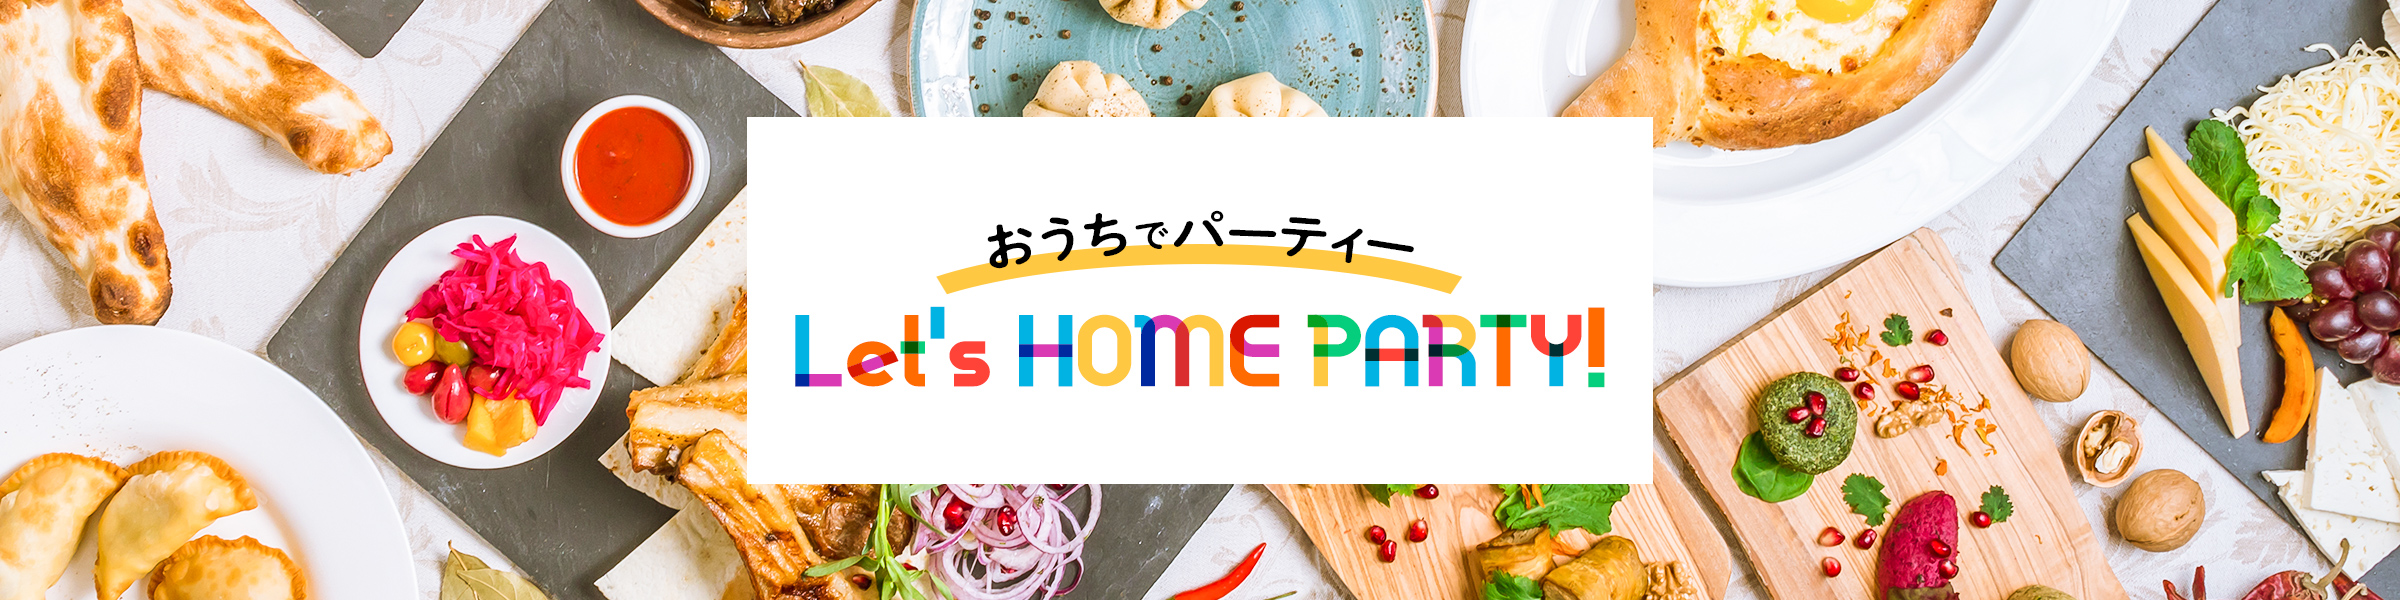 Let's HOME PARTY